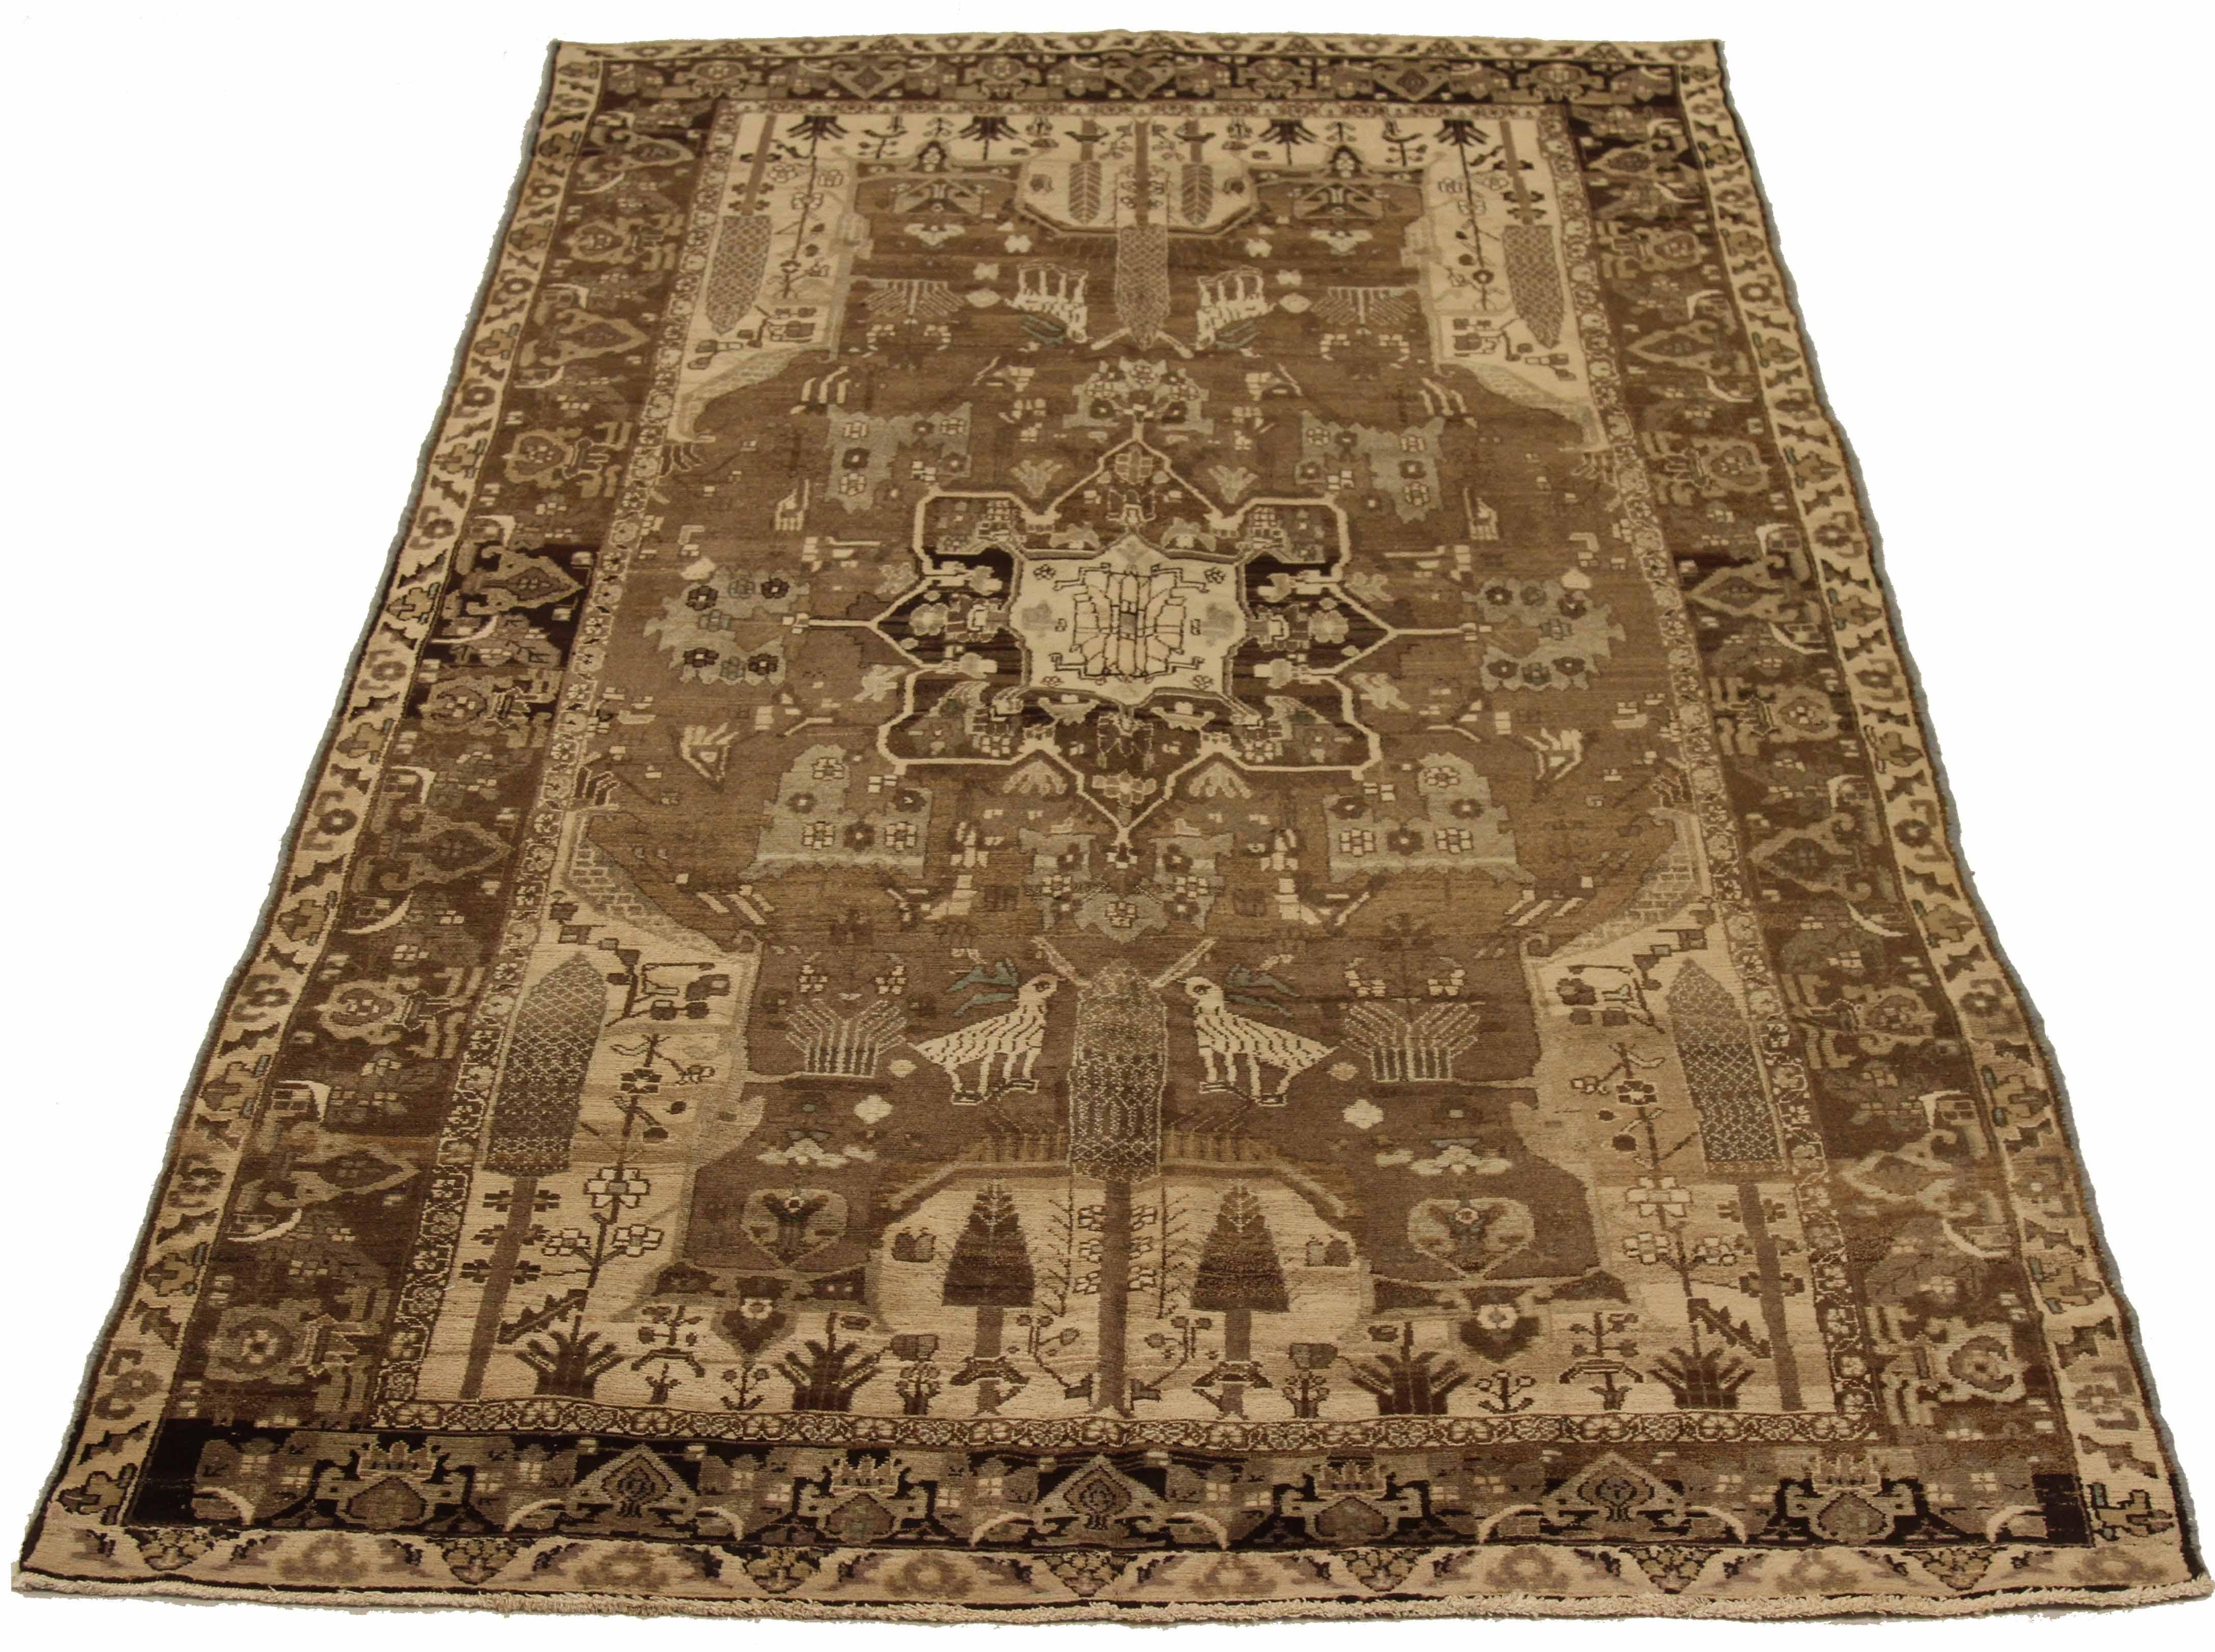 Antique Persian area rug handwoven from the finest sheep’s wool. It’s colored with all-natural vegetable dyes that are safe for humans and pets. It’s a traditional Kolyai design handwoven by expert artisans. It’s a lovely area rug that can be